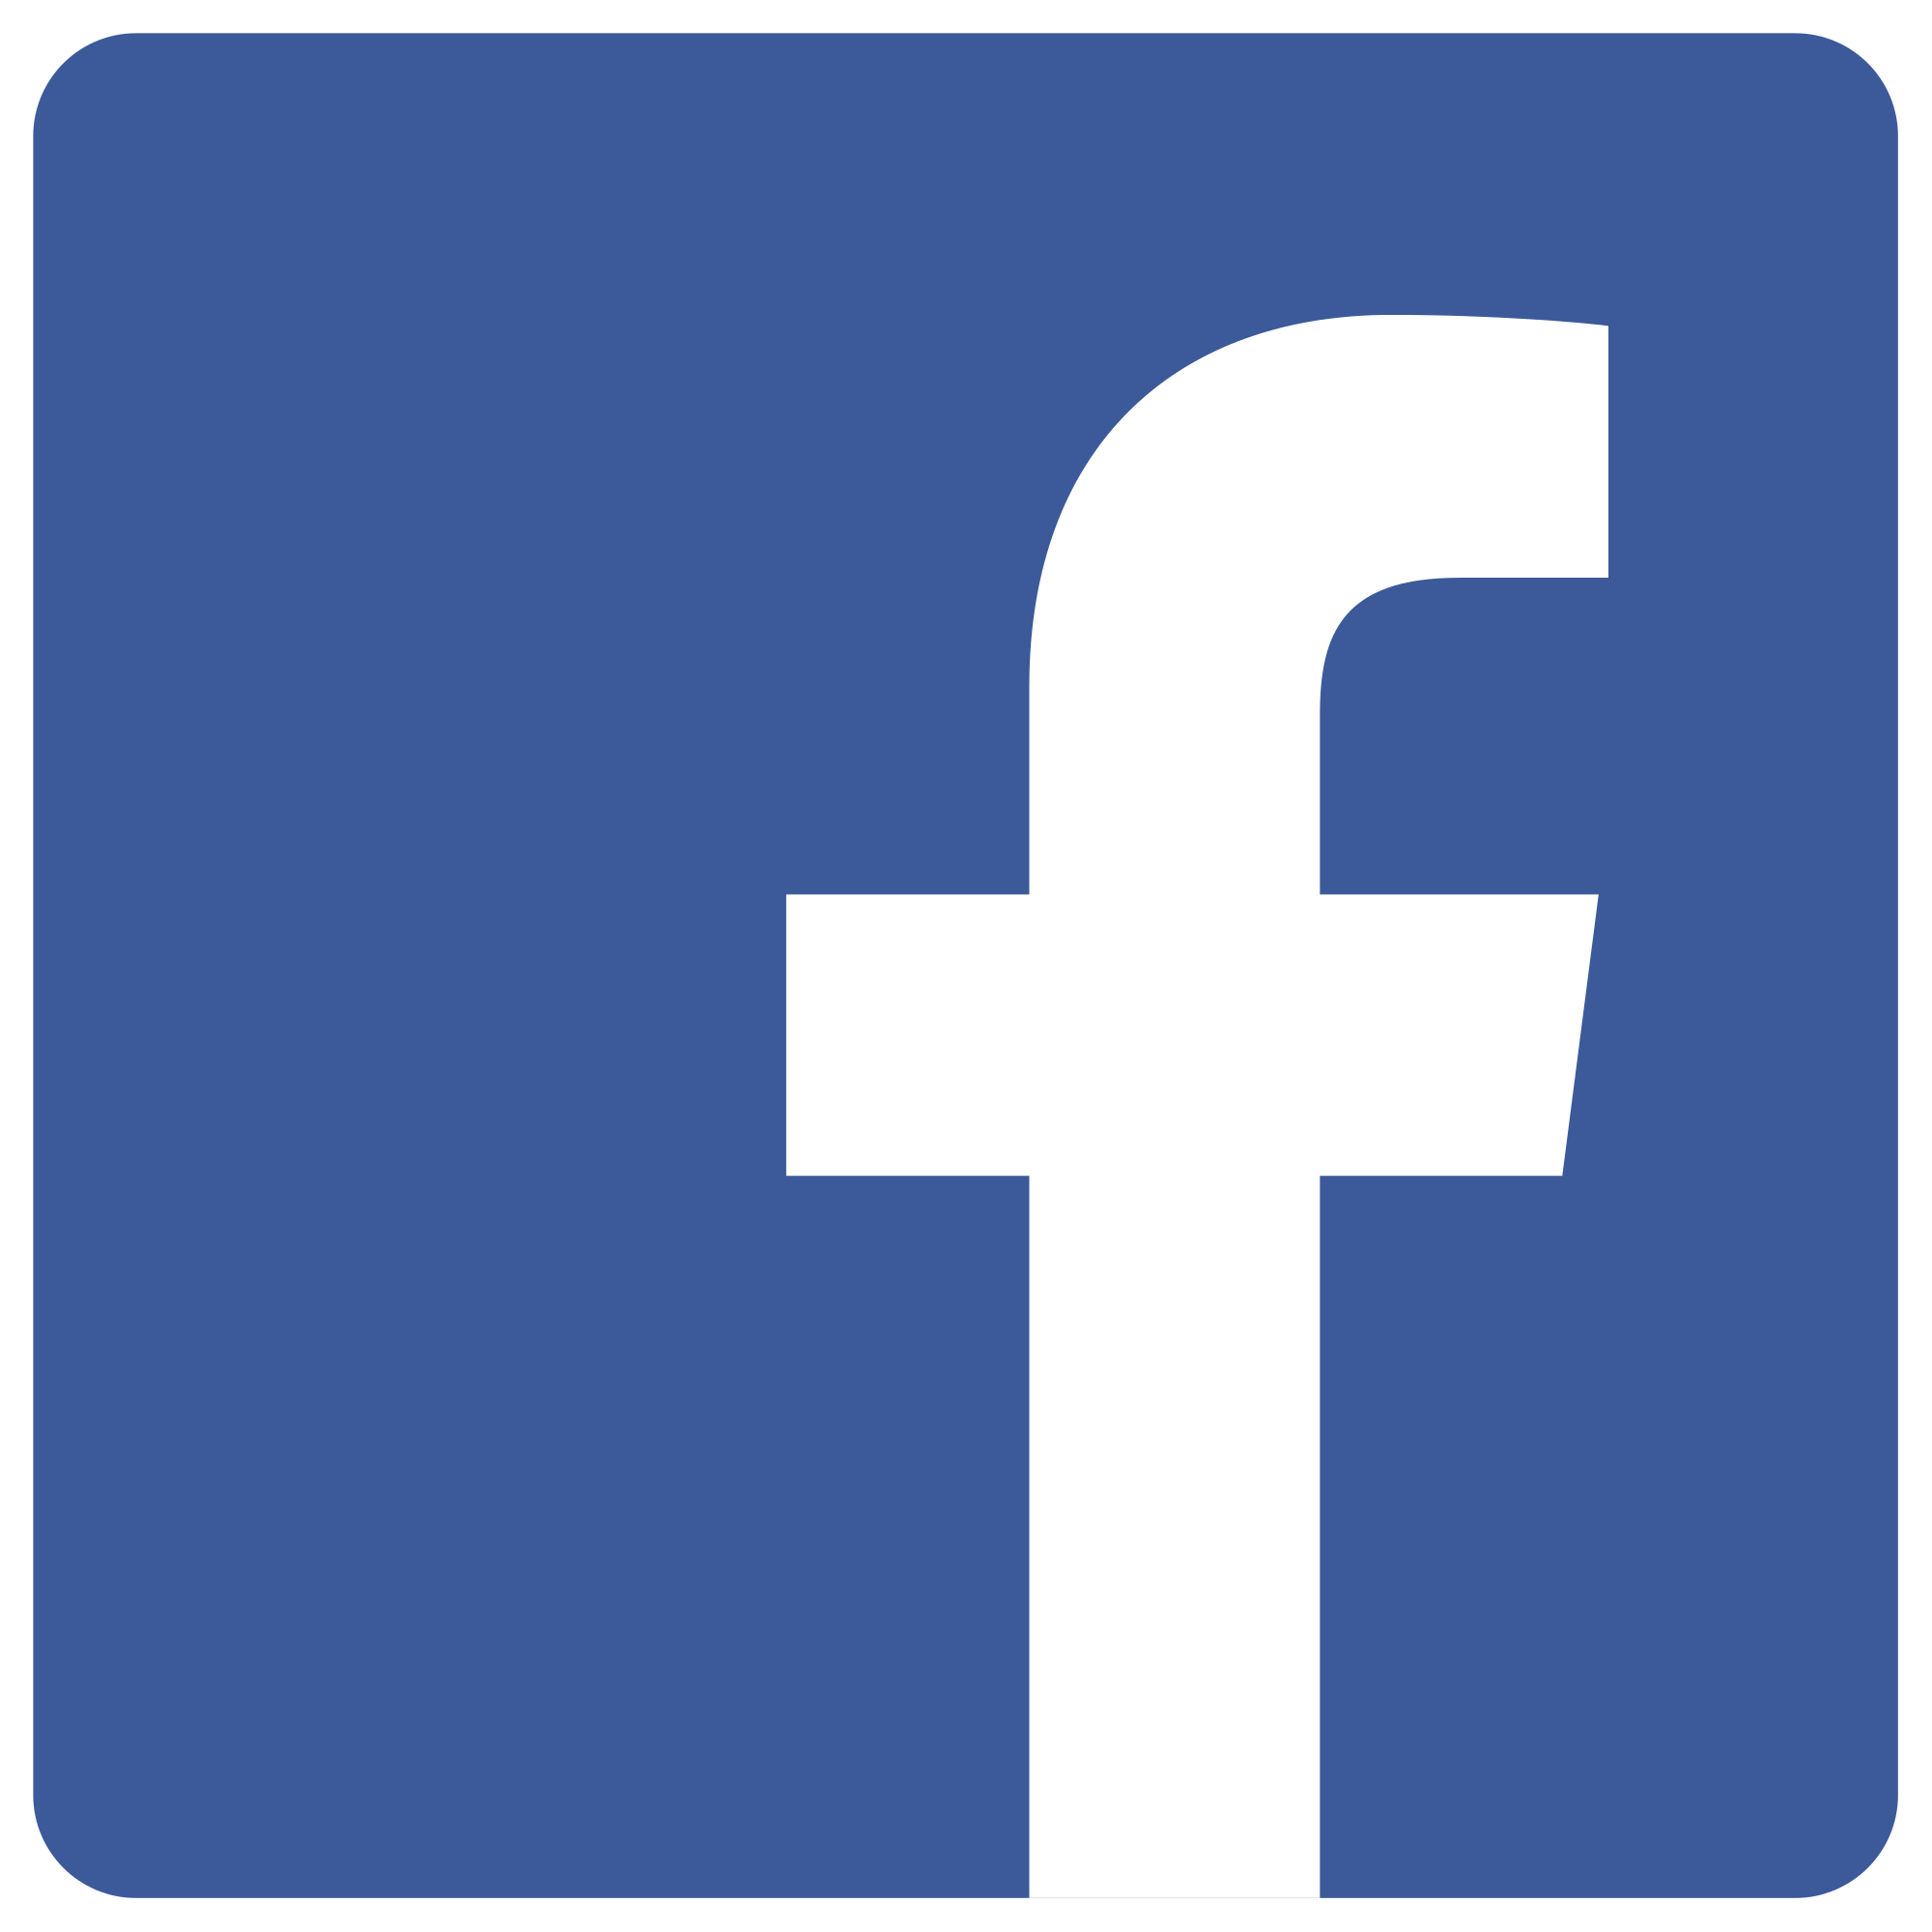 Entry with Facebook